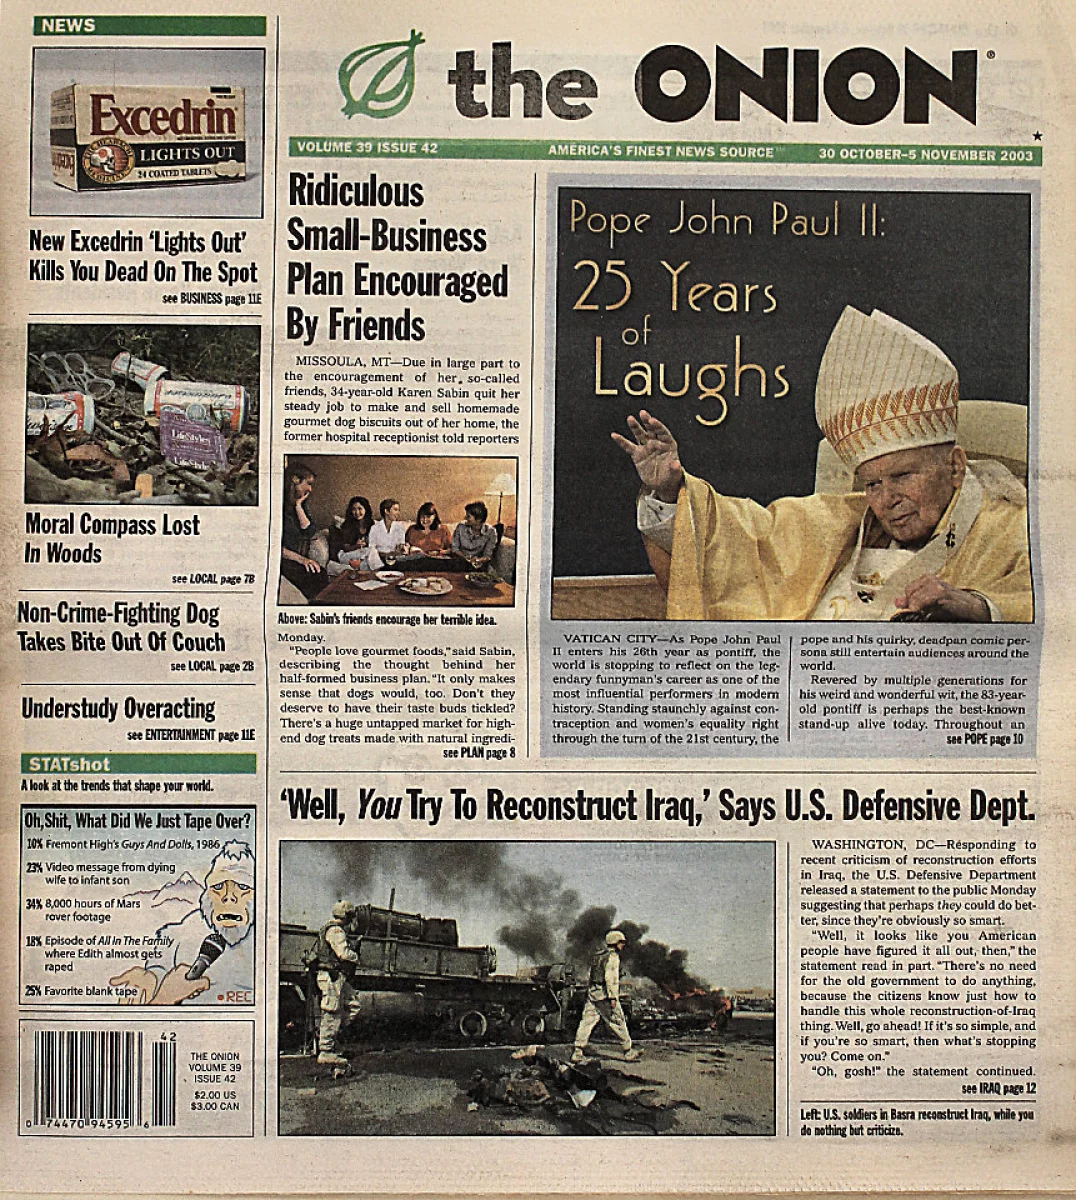 The Onion to cease print publication nationwide, Local News